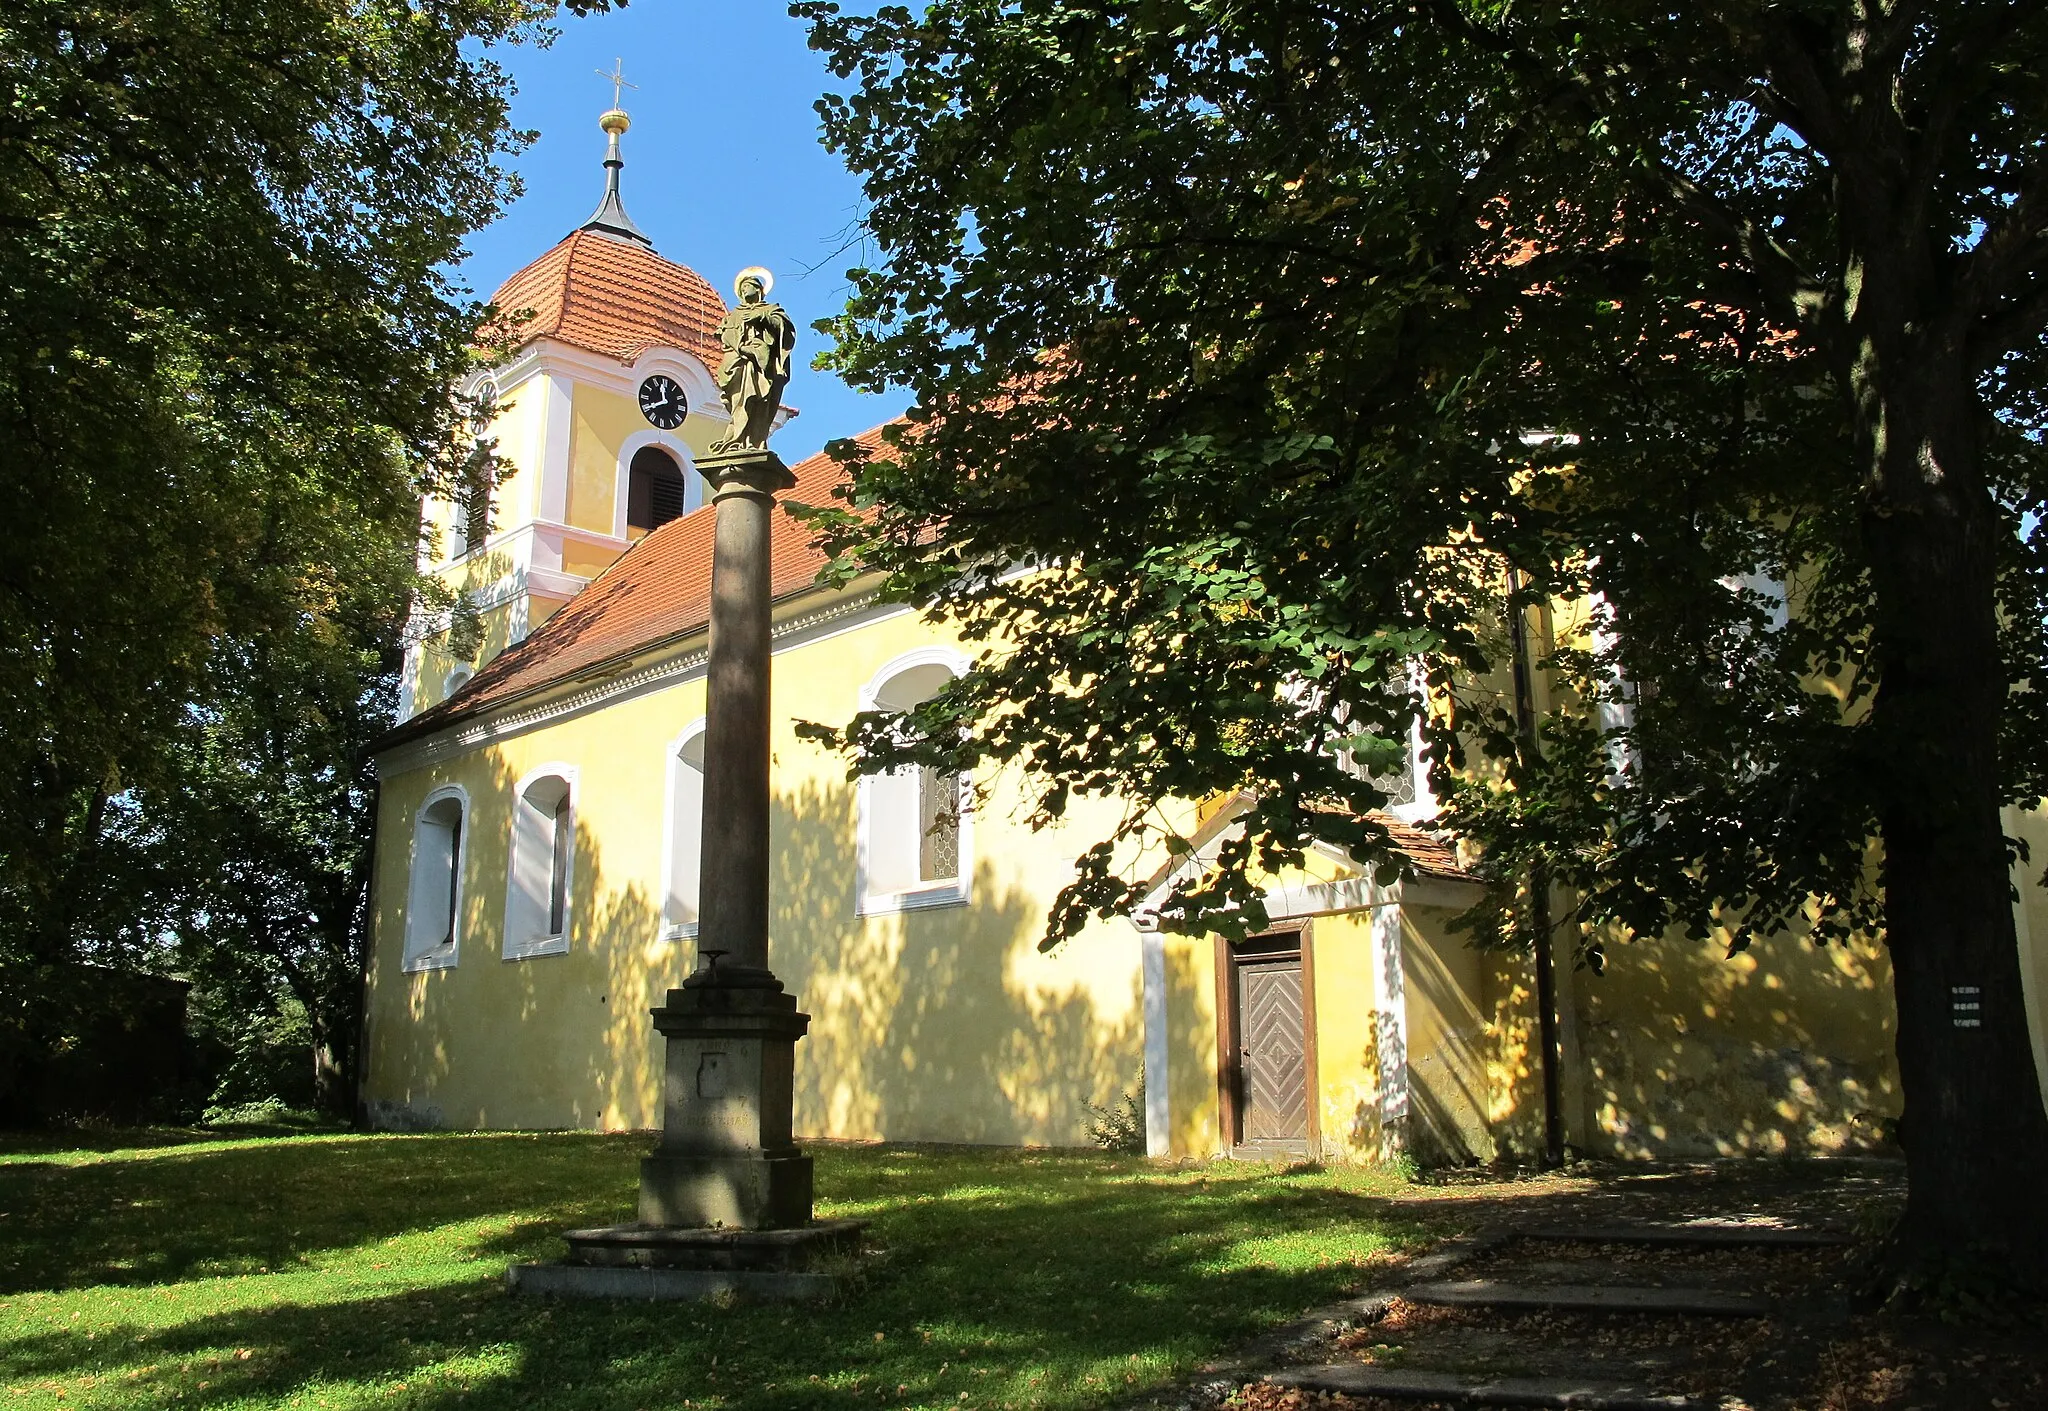 Photo showing: Church of St. Andrew in Lochovice, Beroun District in Czech Republic